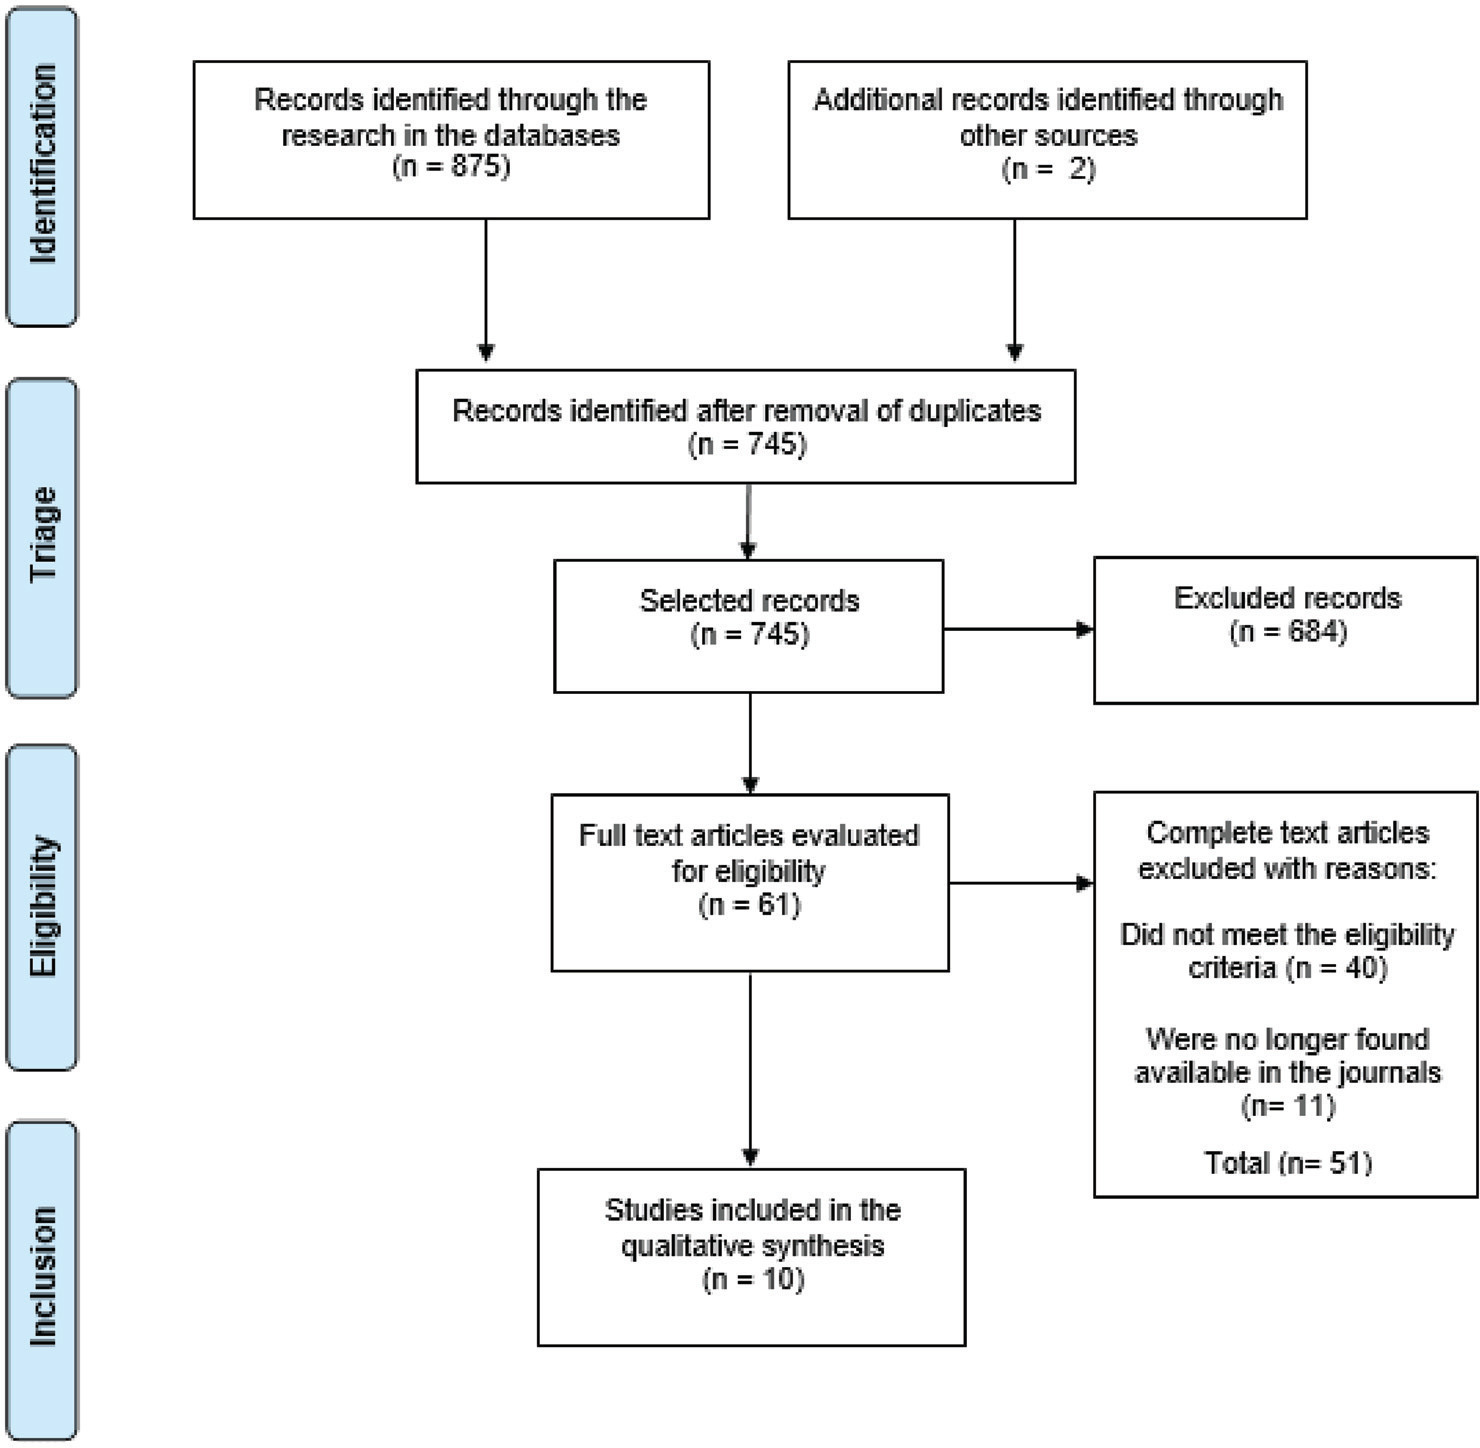 Renin-Angiotensin-Aldosterone System in Women Using Combined Oral Contraceptive: A Systematic Review